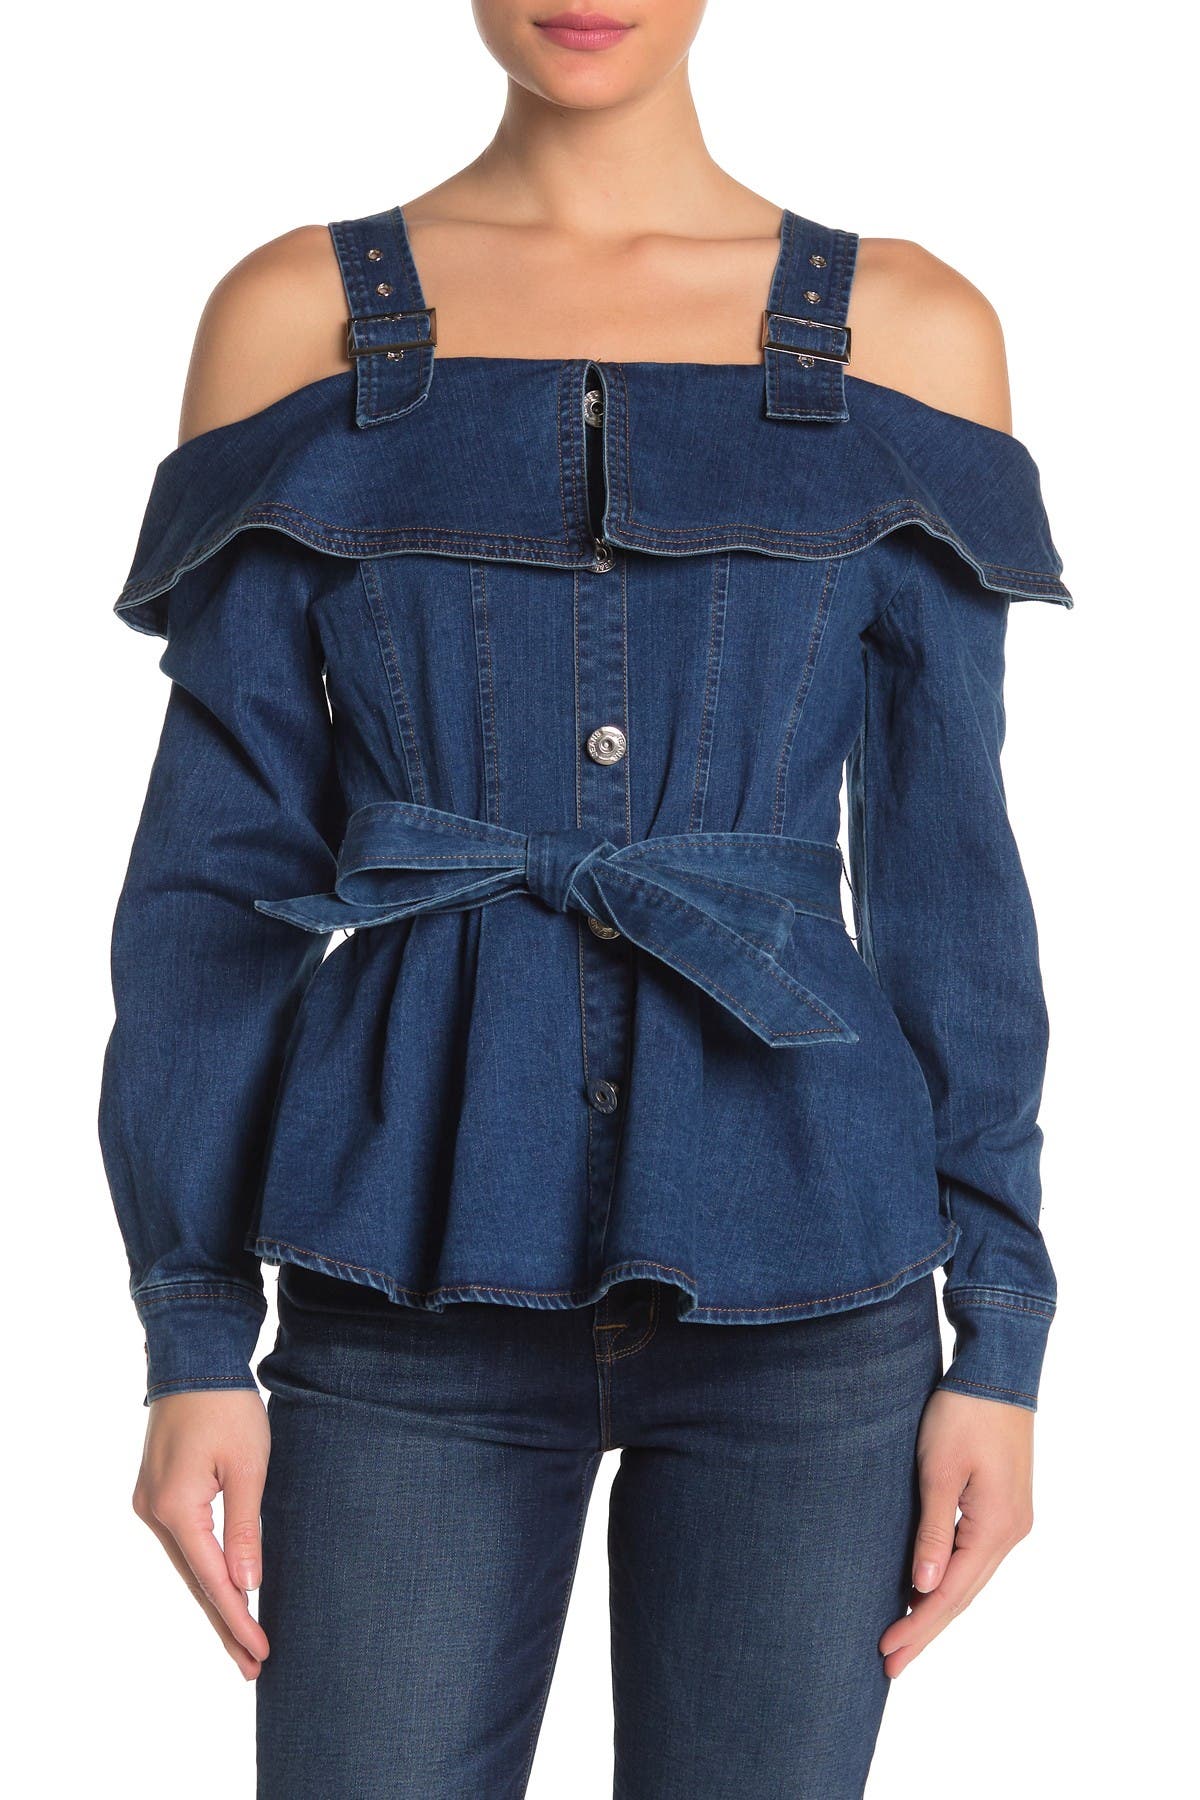 jeans with straps over shoulders